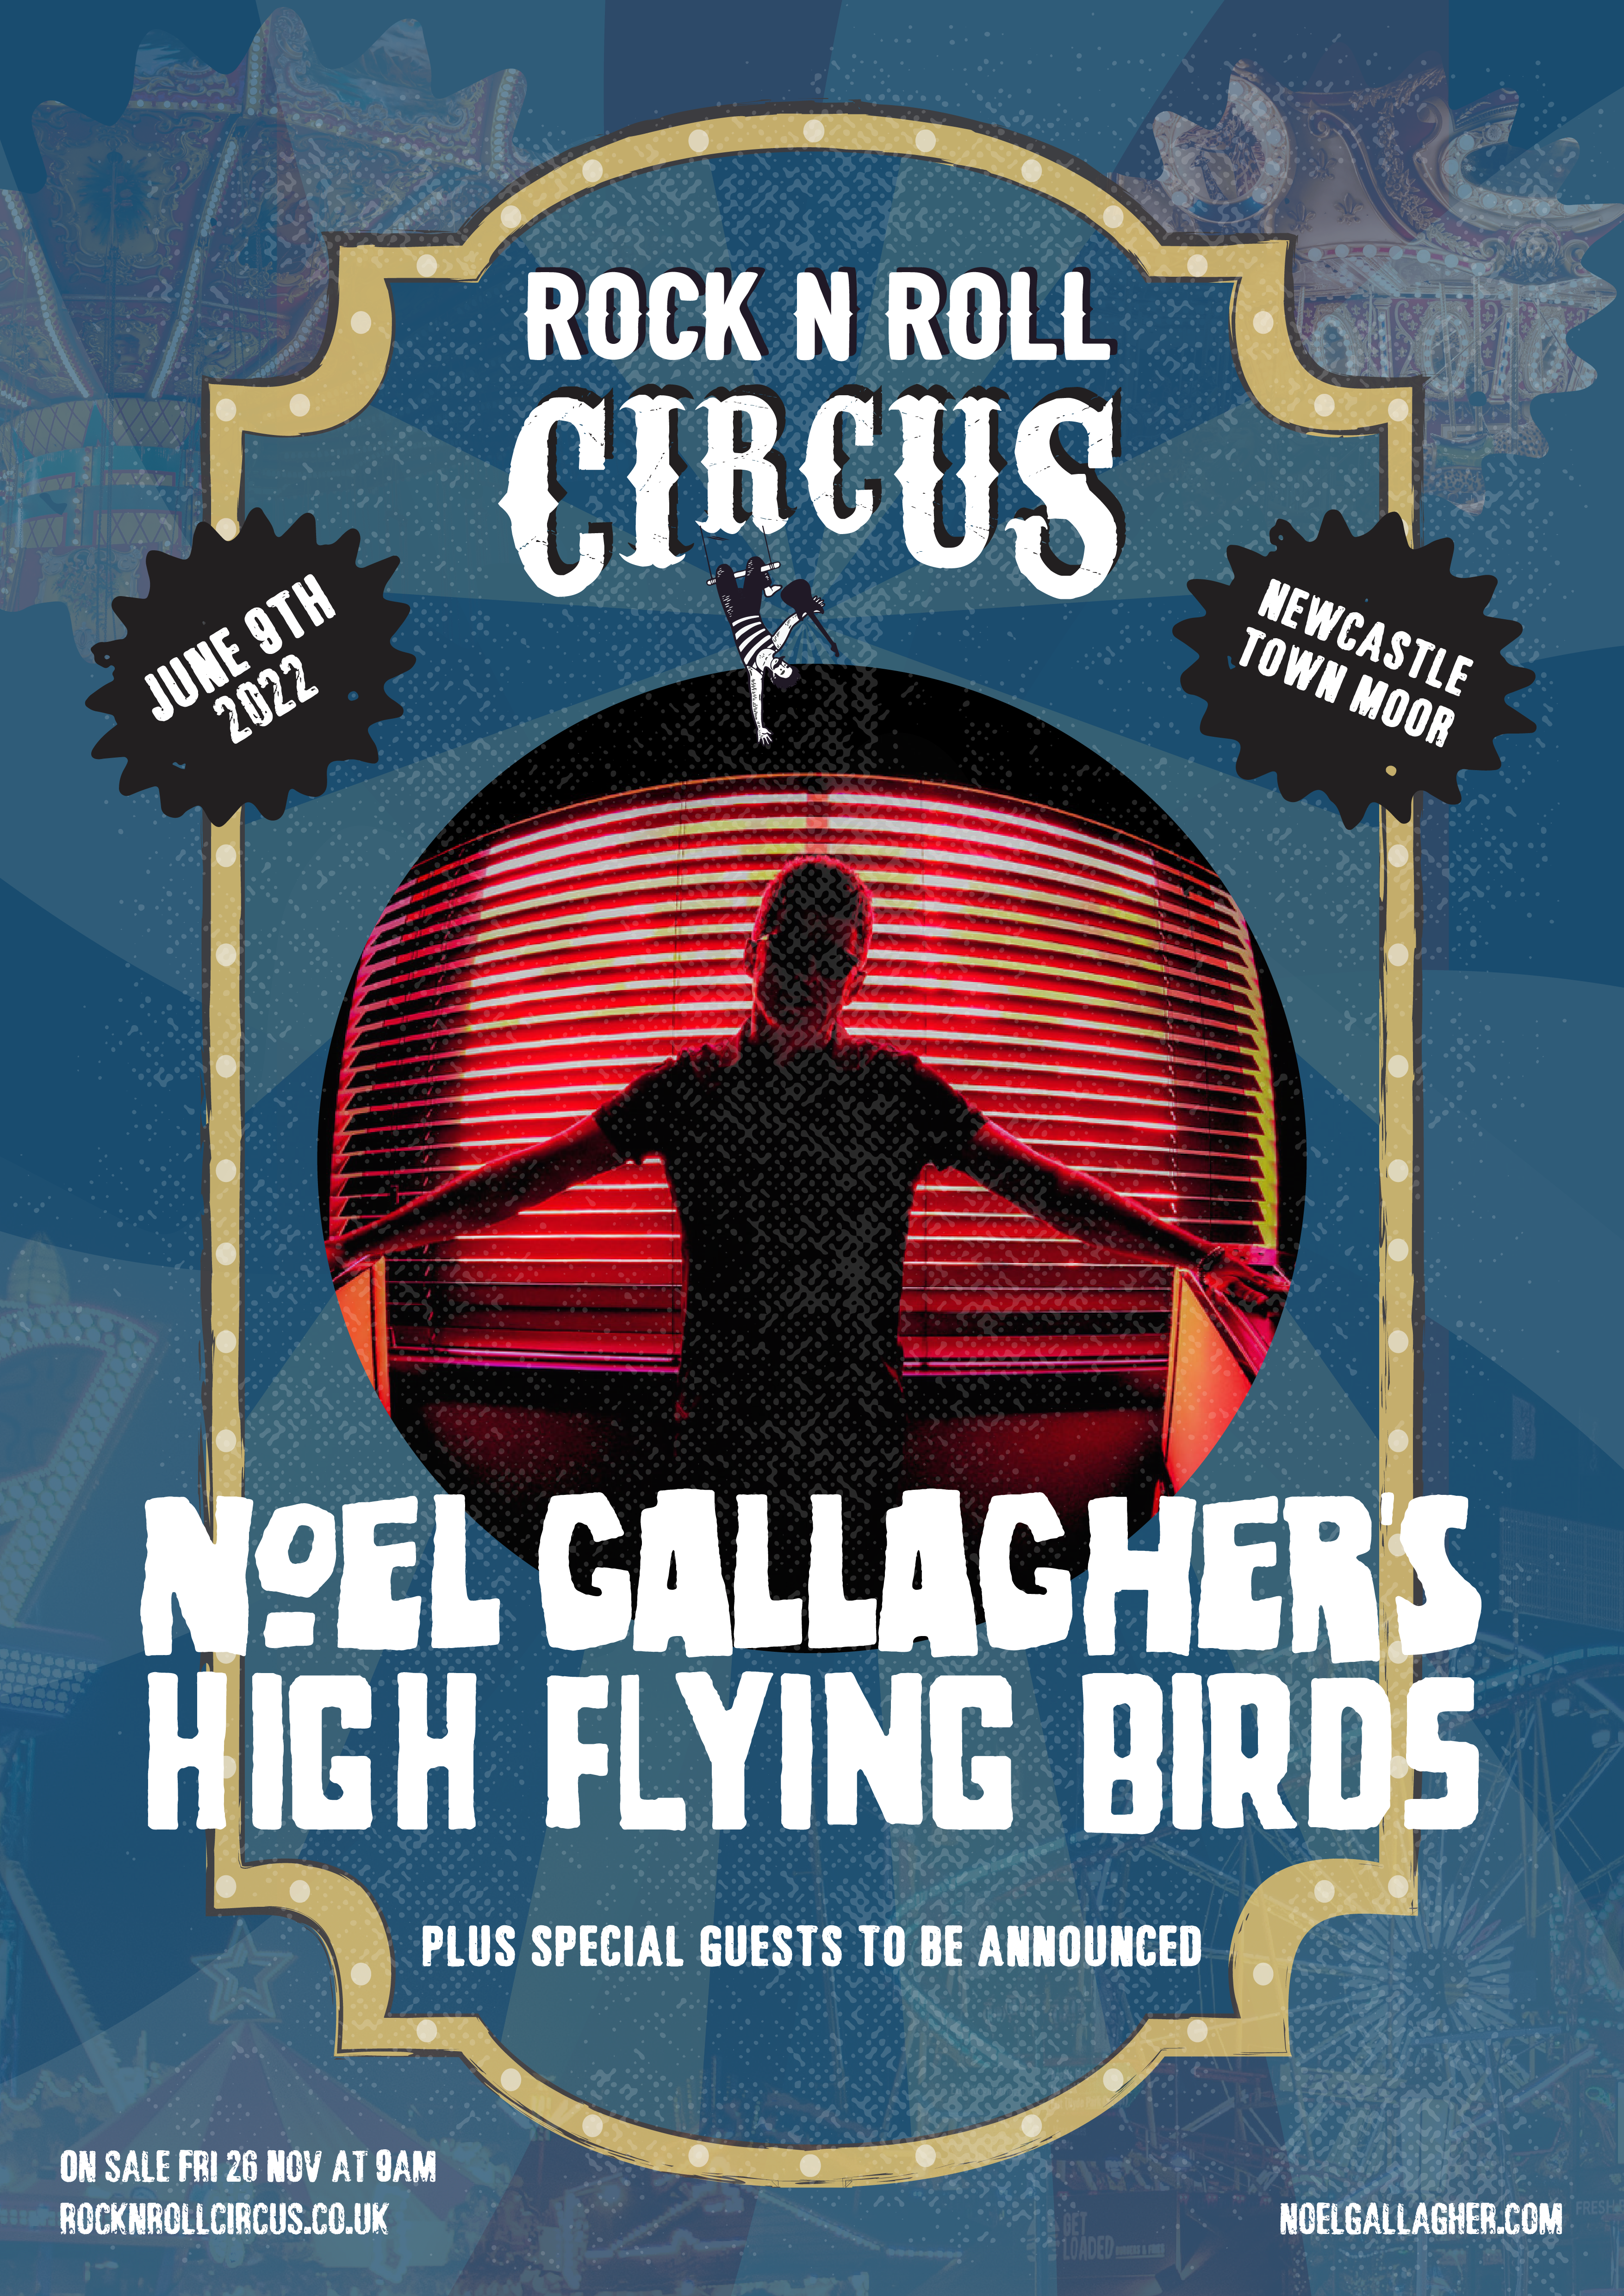 NOEL GALLAGHER’S HIGH FLYING BIRDS TO LAUNCH ALL NEW ‘ROCK N ROLL’ CIRCUS